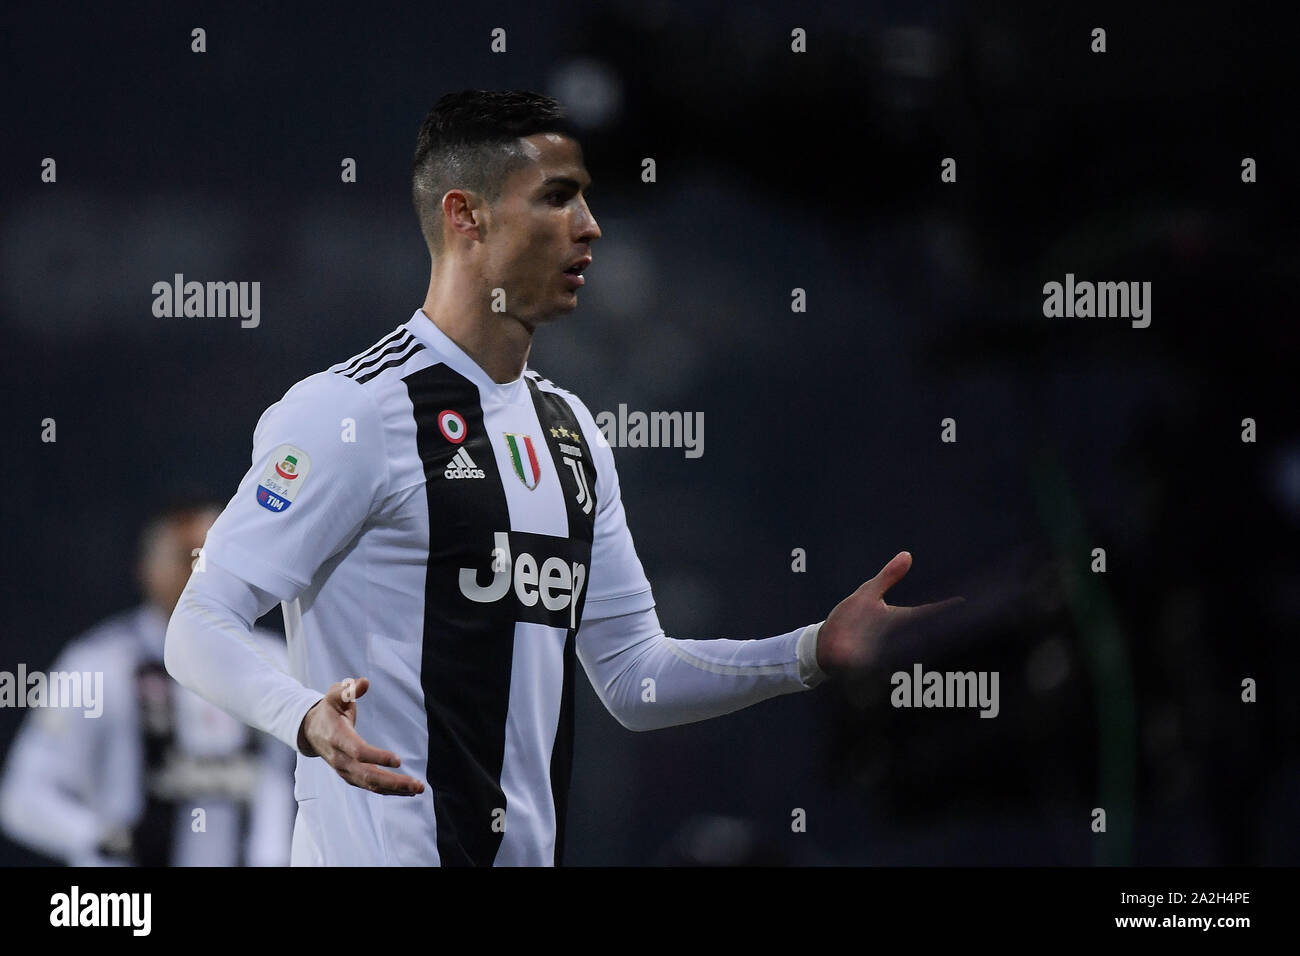 Cristiano Ronaldo Playing for Juventus Soccer Team in Italy Stock Photo